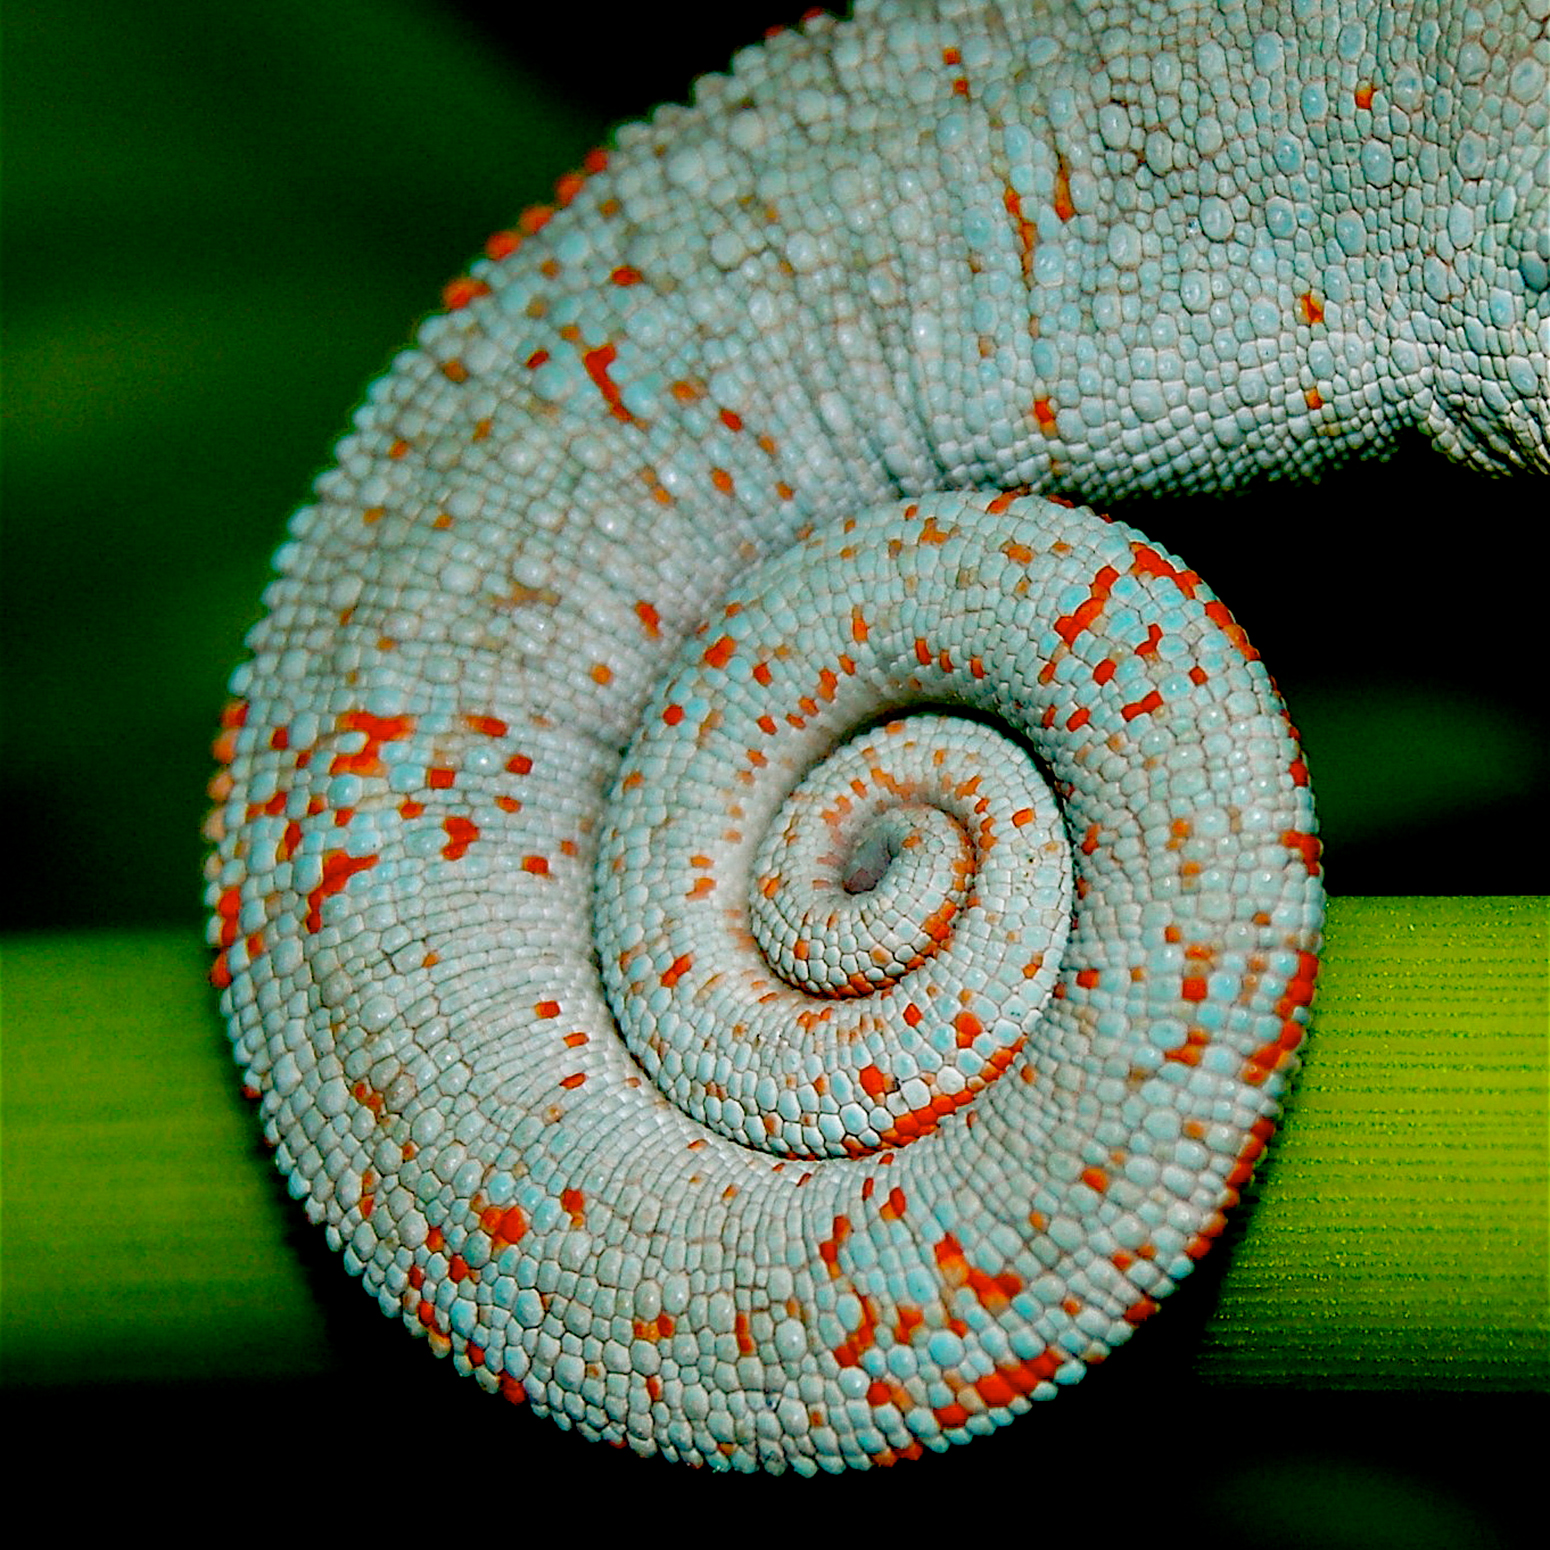 A scaly curved green tail with spots of red in front of a green stem